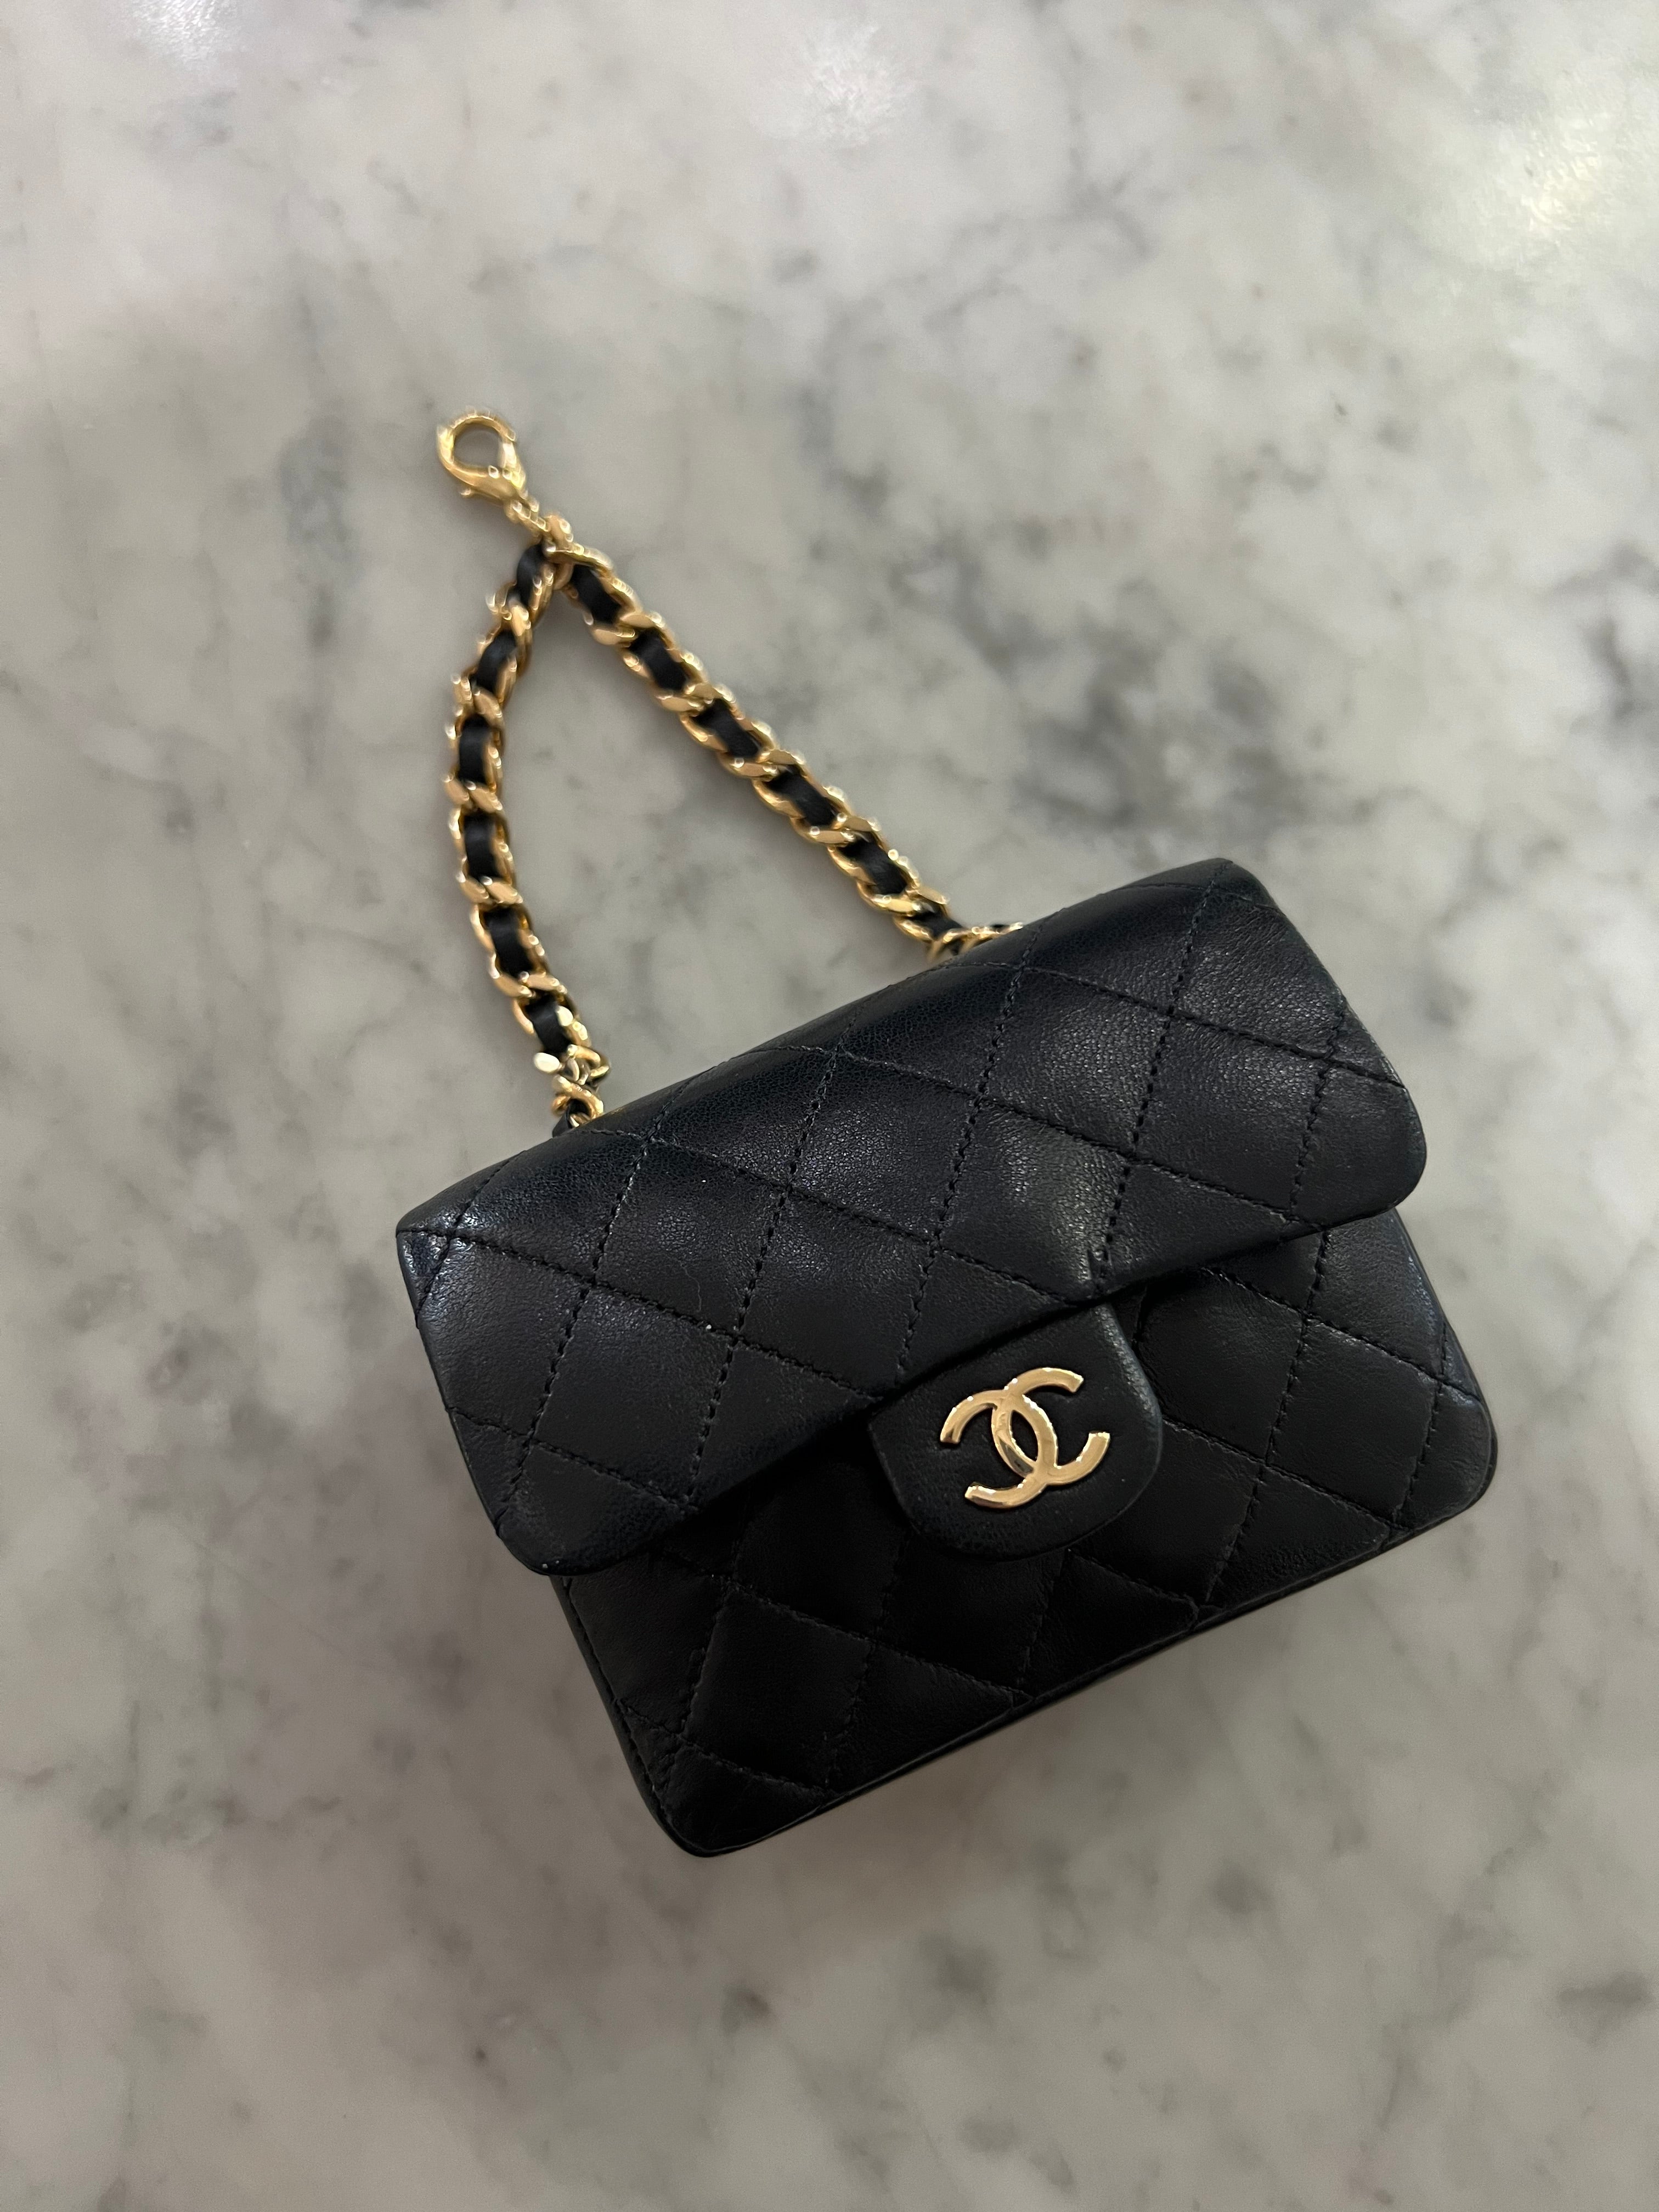 Pin by AllBag on C-hanel Bag  Chanel mini bag, Girly bags, Luxury